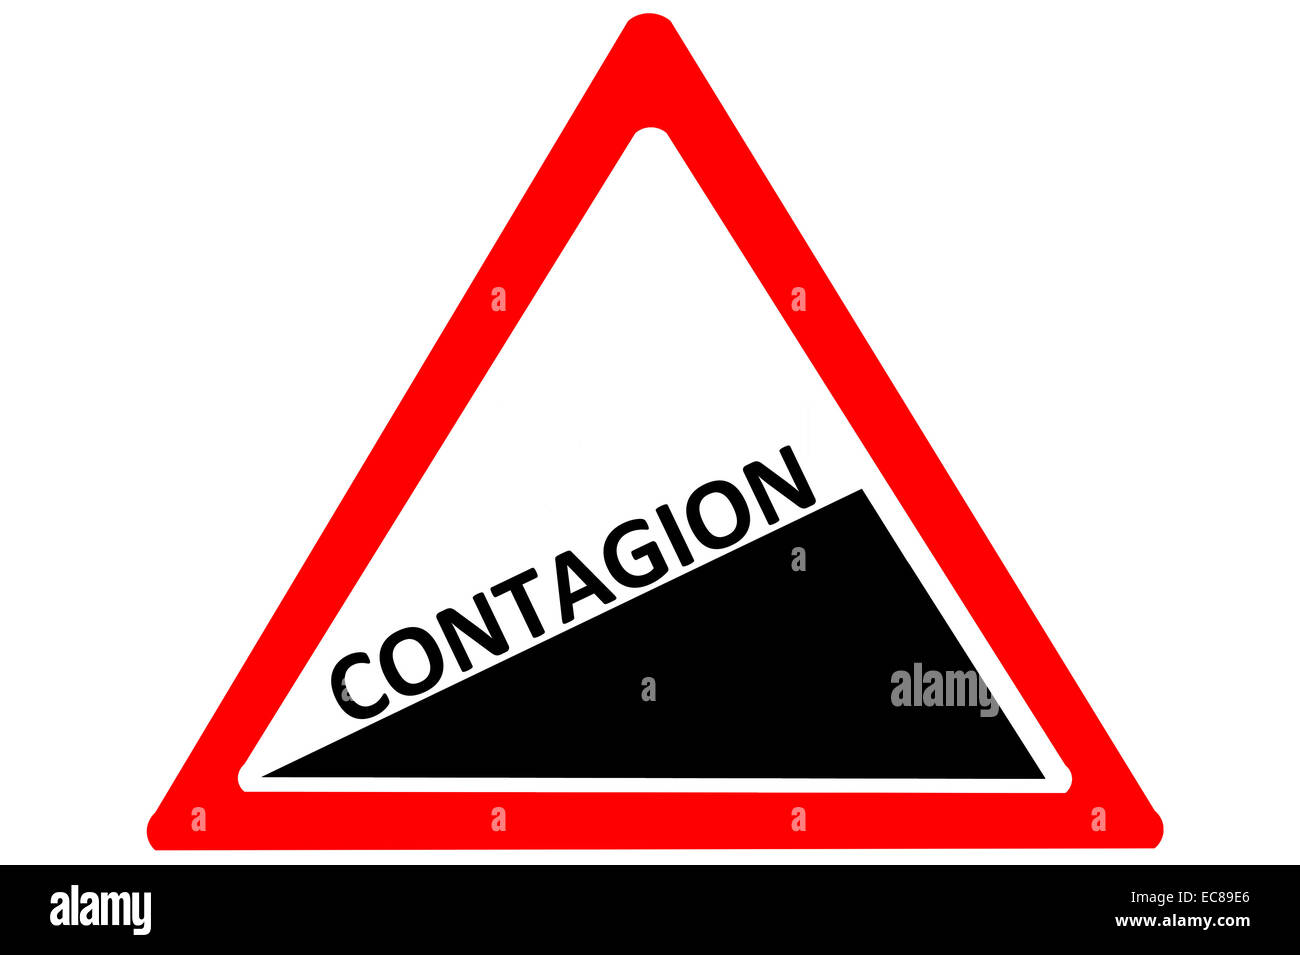 Contagion rising warning road sign isolated on pure white background Stock Photo